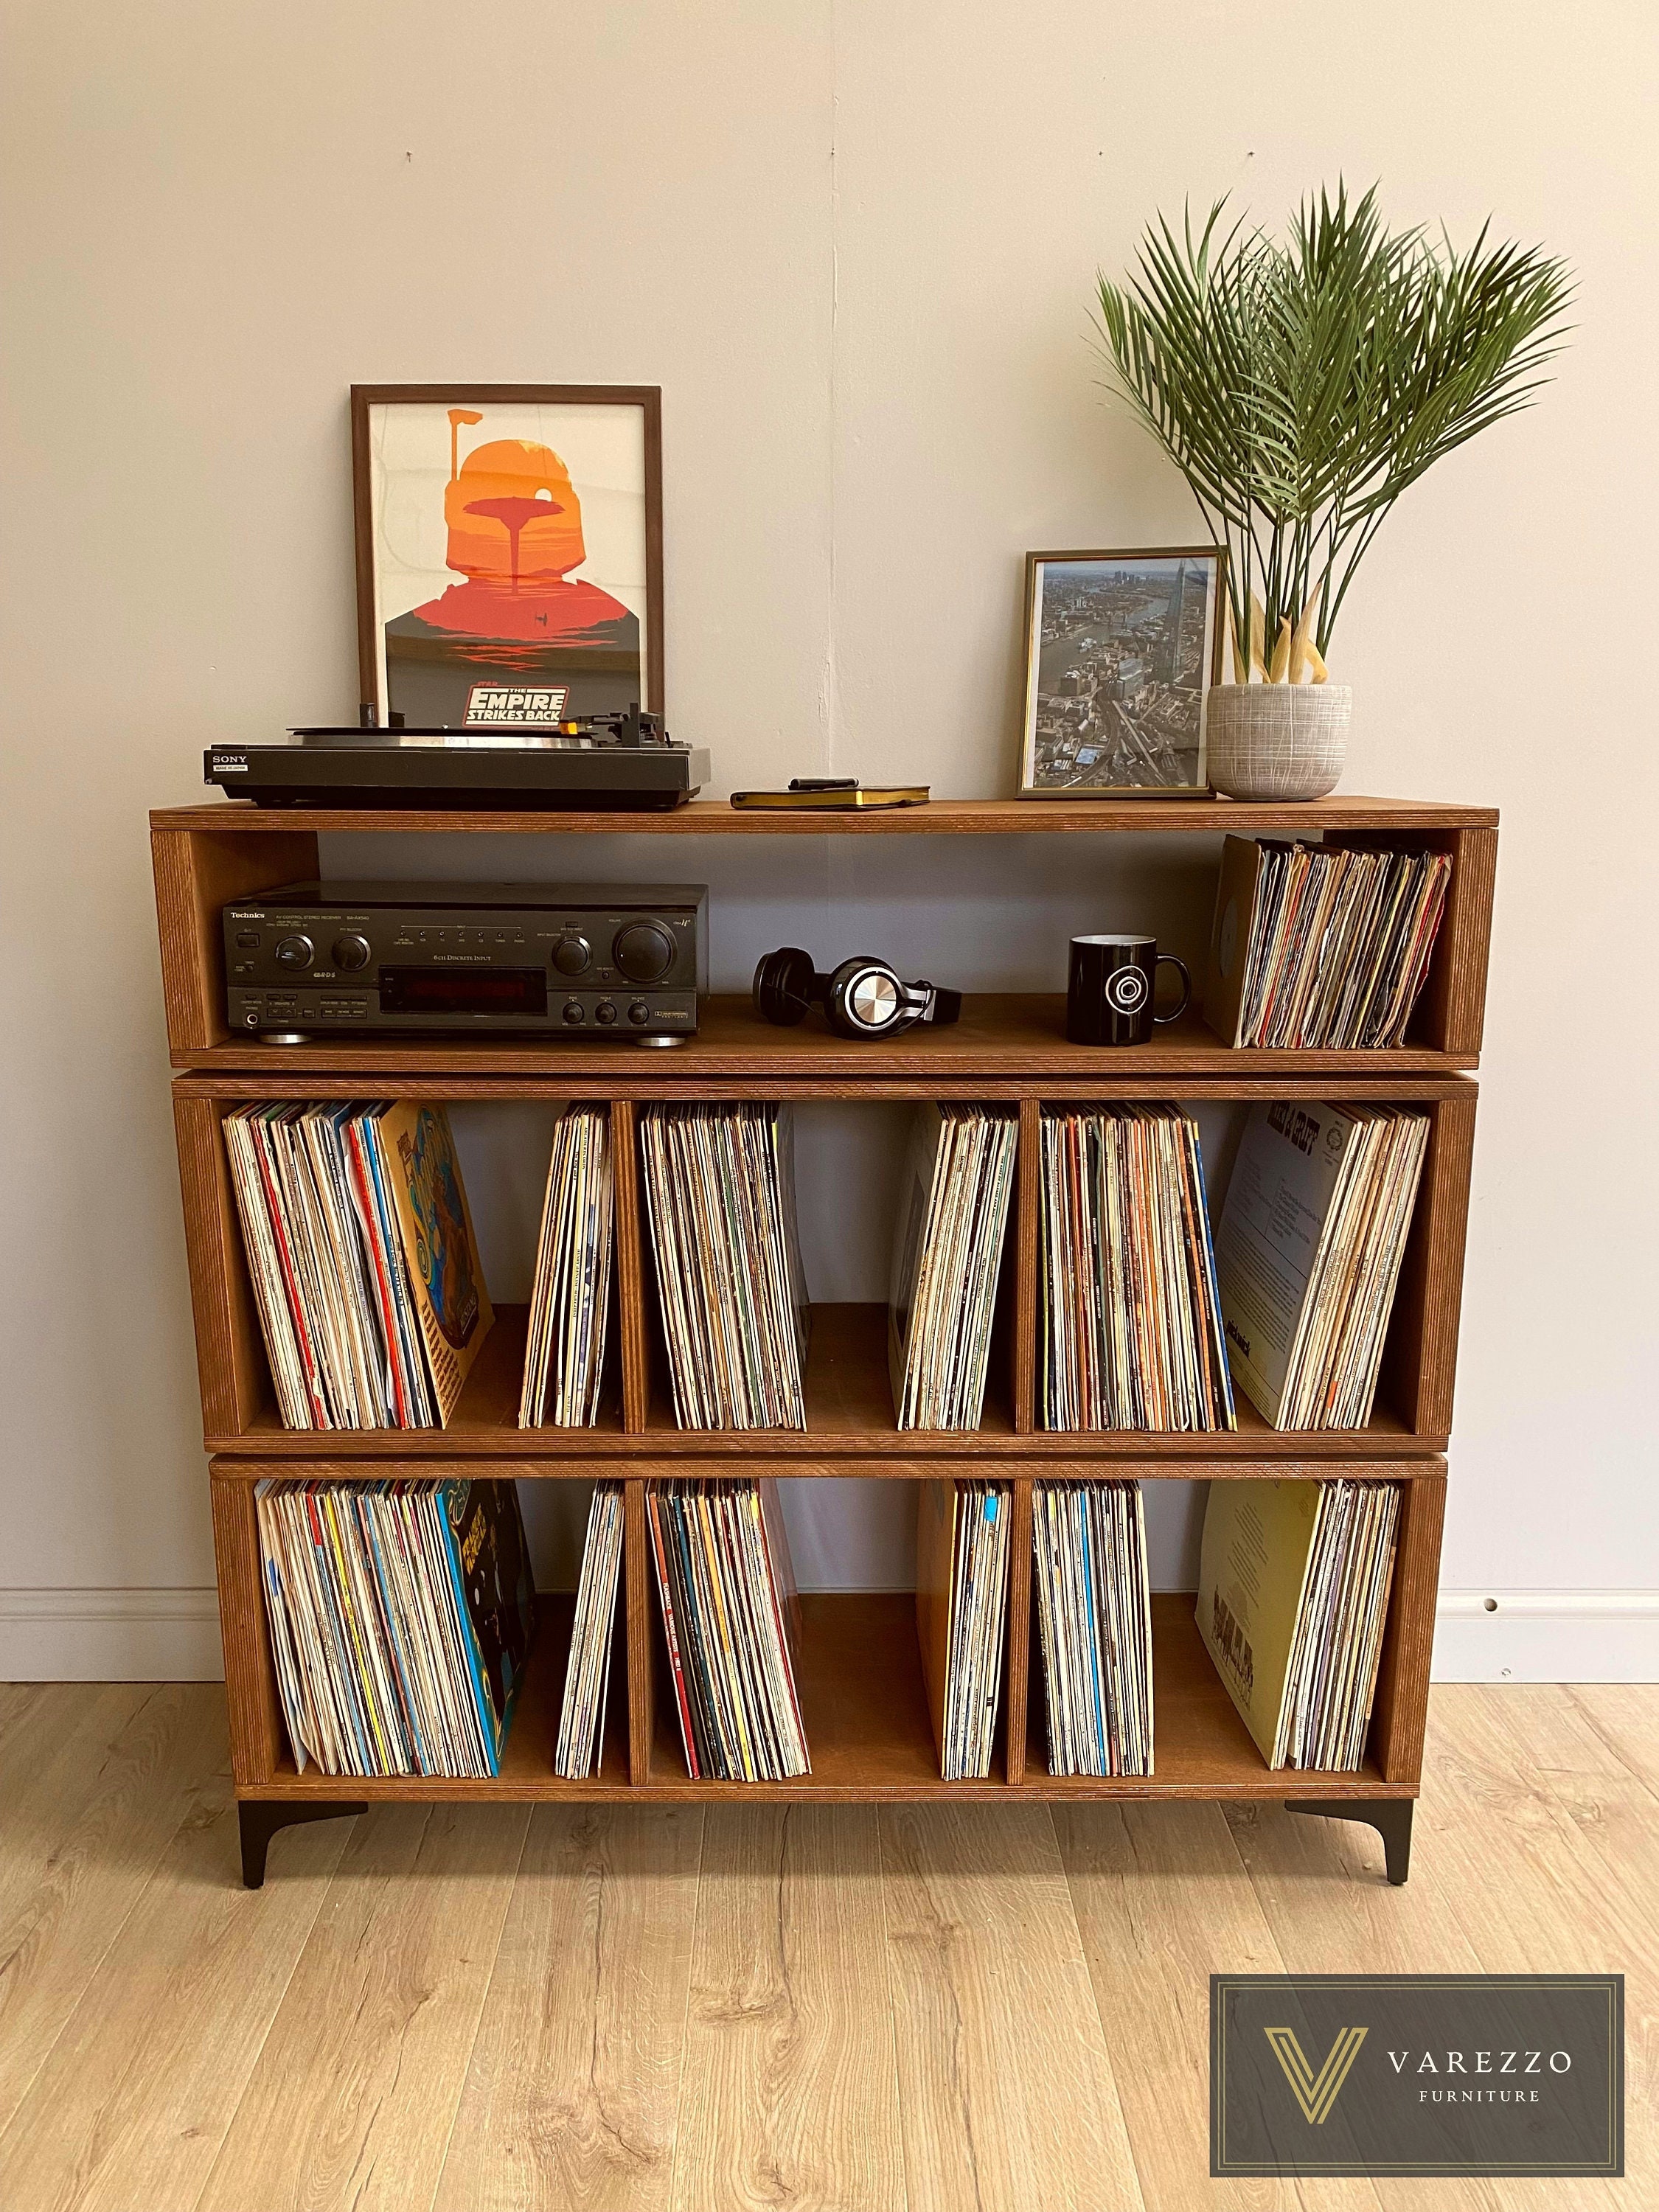 Made my own record storage from IKEA storage crates and scaffolding : r/ vinyl